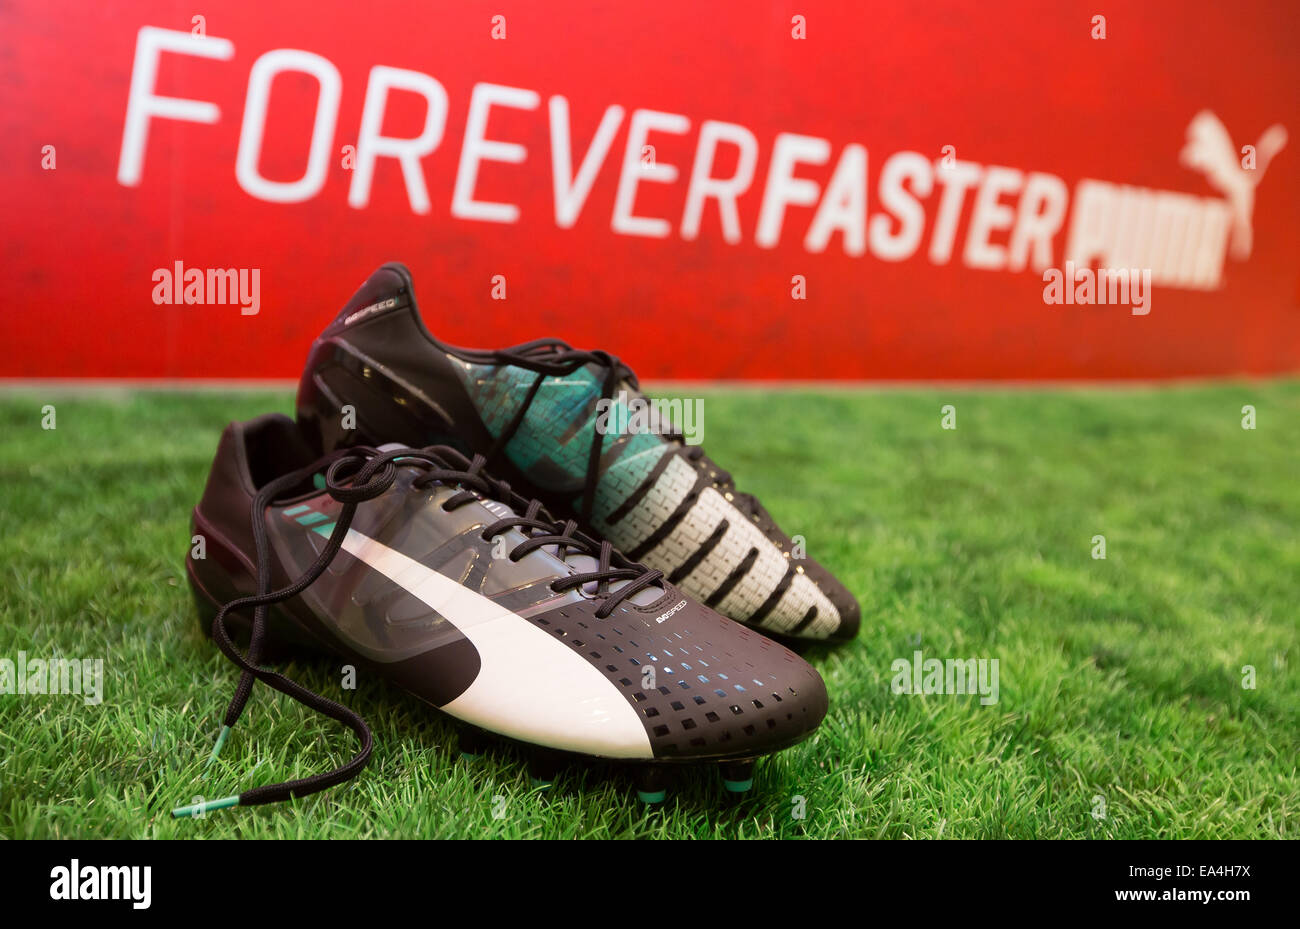 PUMA football boot evoSPEED lying on the grass with Forever Faster slogan  and PUMA logo in the background. COMMERCIAL HANDOUT/EDITORIAL USE ONLY/NO  SALES. Please quote the source "photo: PUMA/Ralf Roedel Stock Photo -